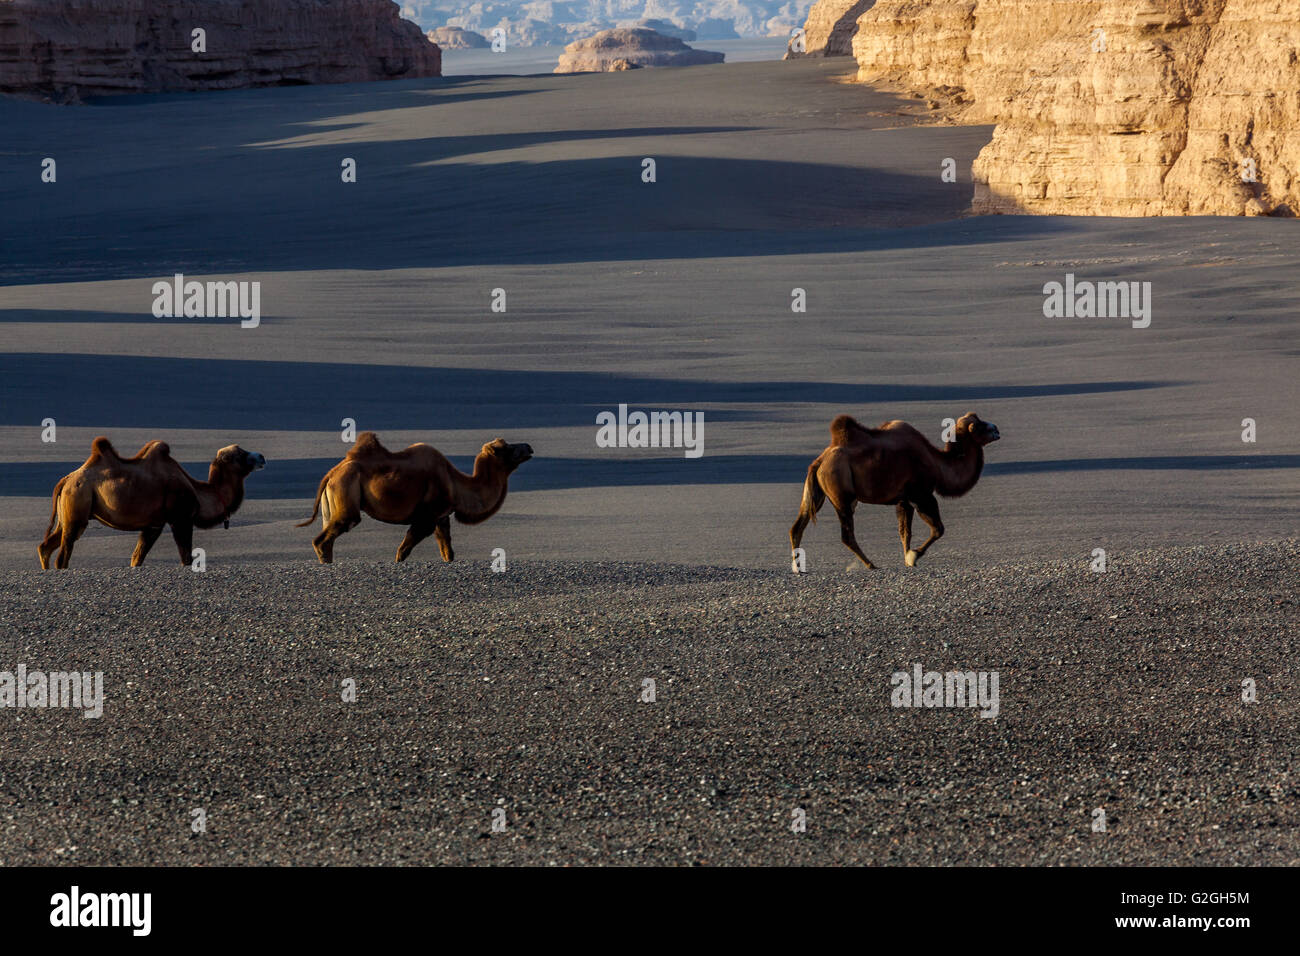 Wild Camels in Yardang Geological Park or Dunhuang UNESCO National Geopark, Gansu Province, China. Stock Photo